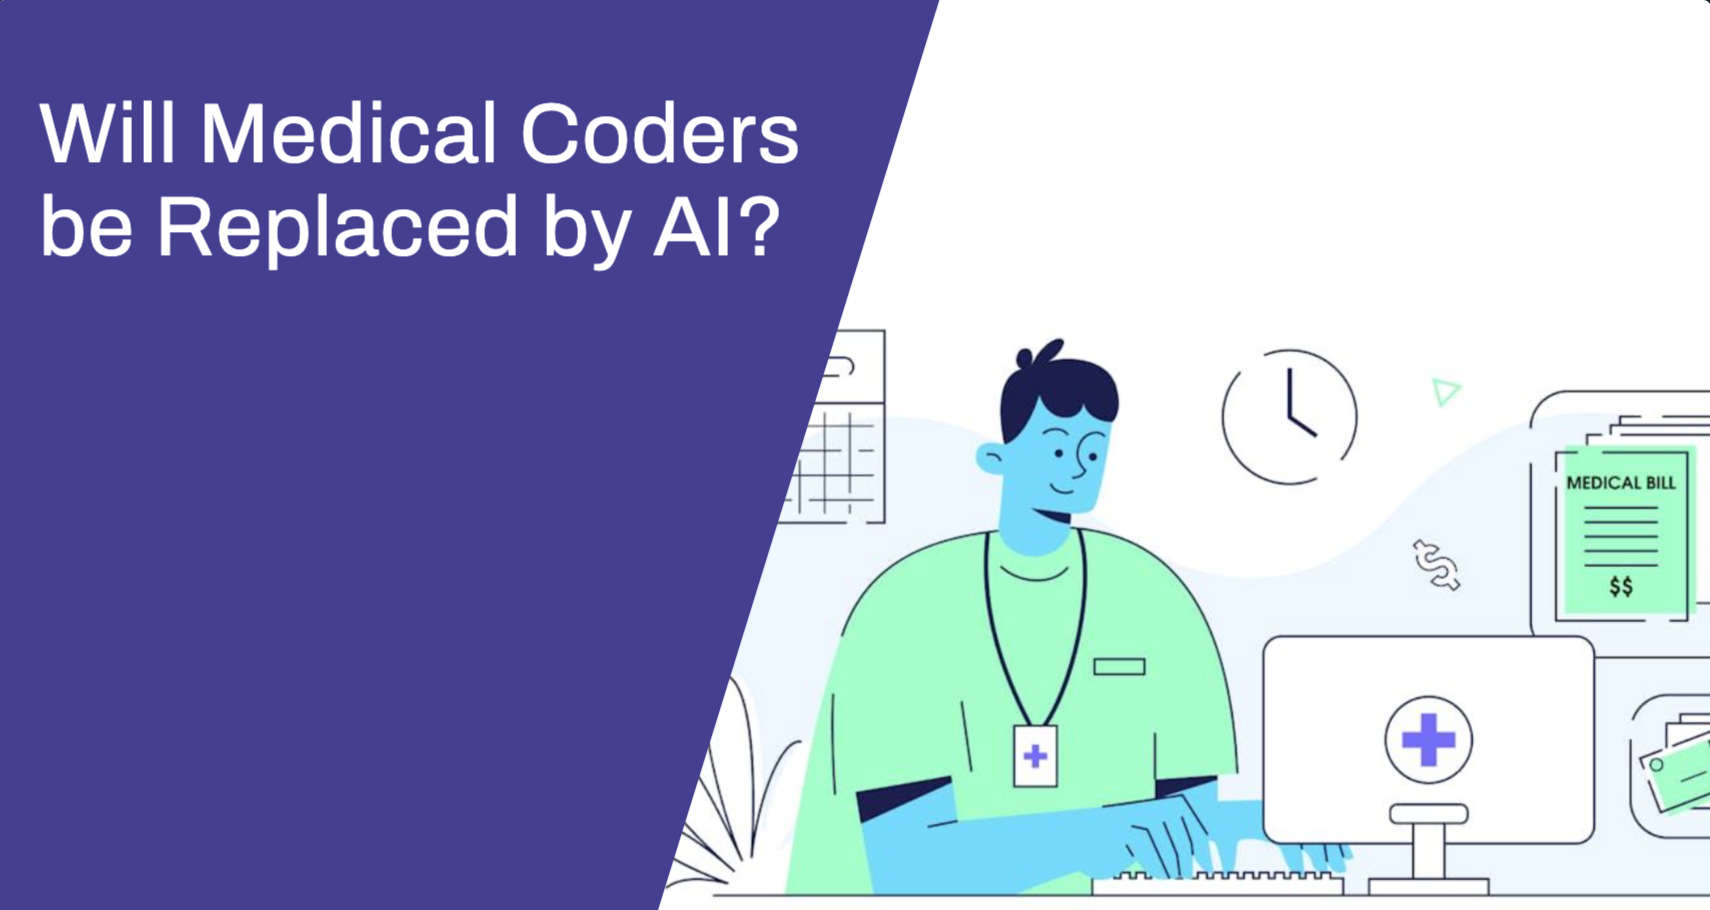 Will Medical Coders be Replaced by AI